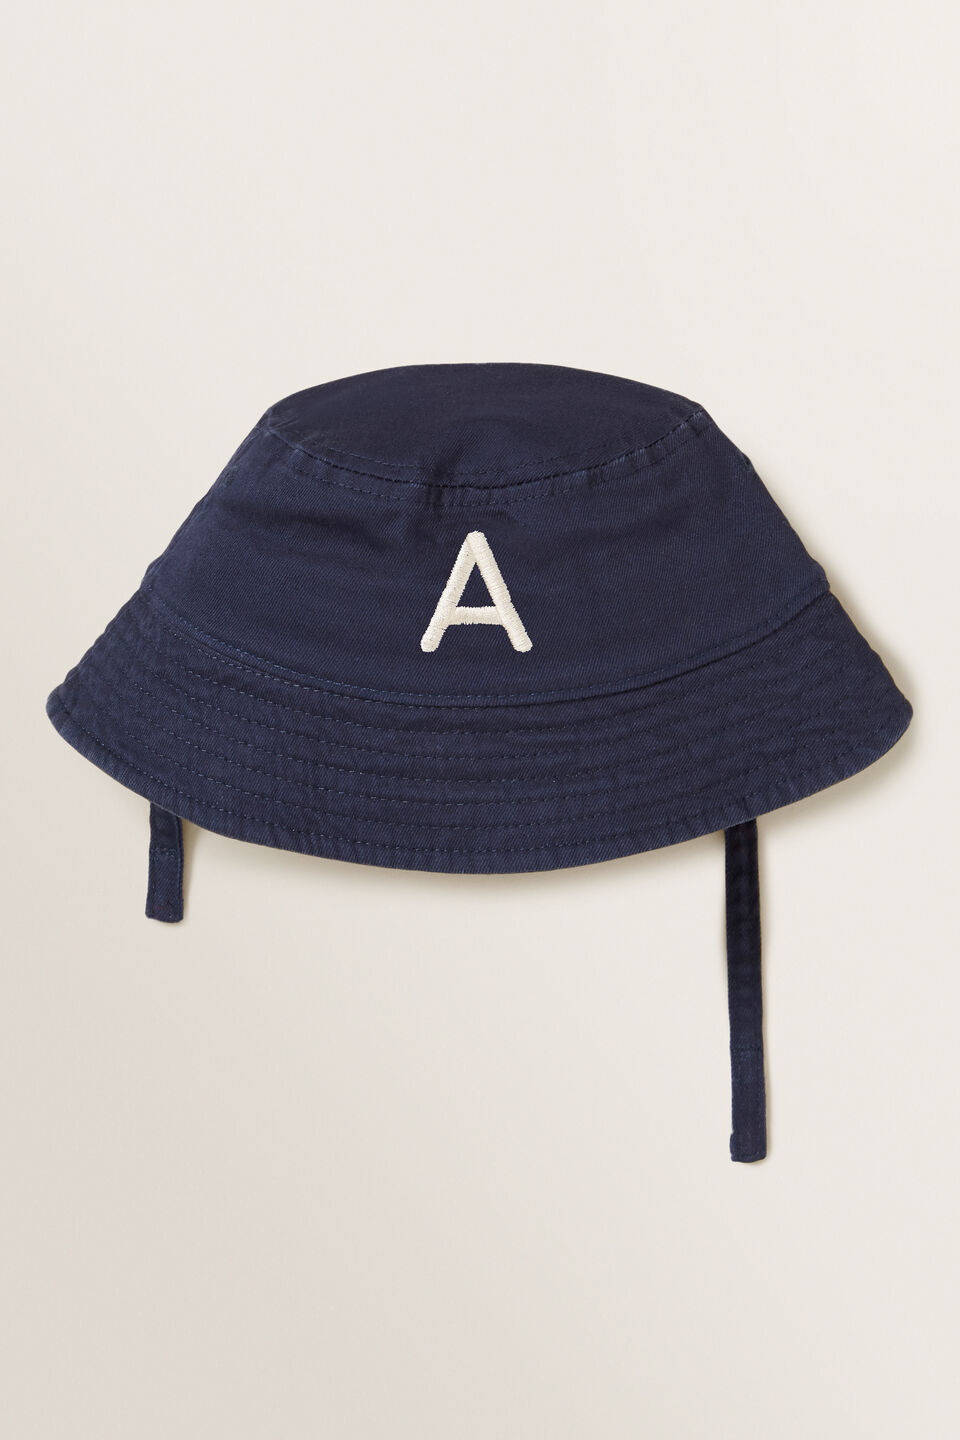 Initial Bucket Hat  A